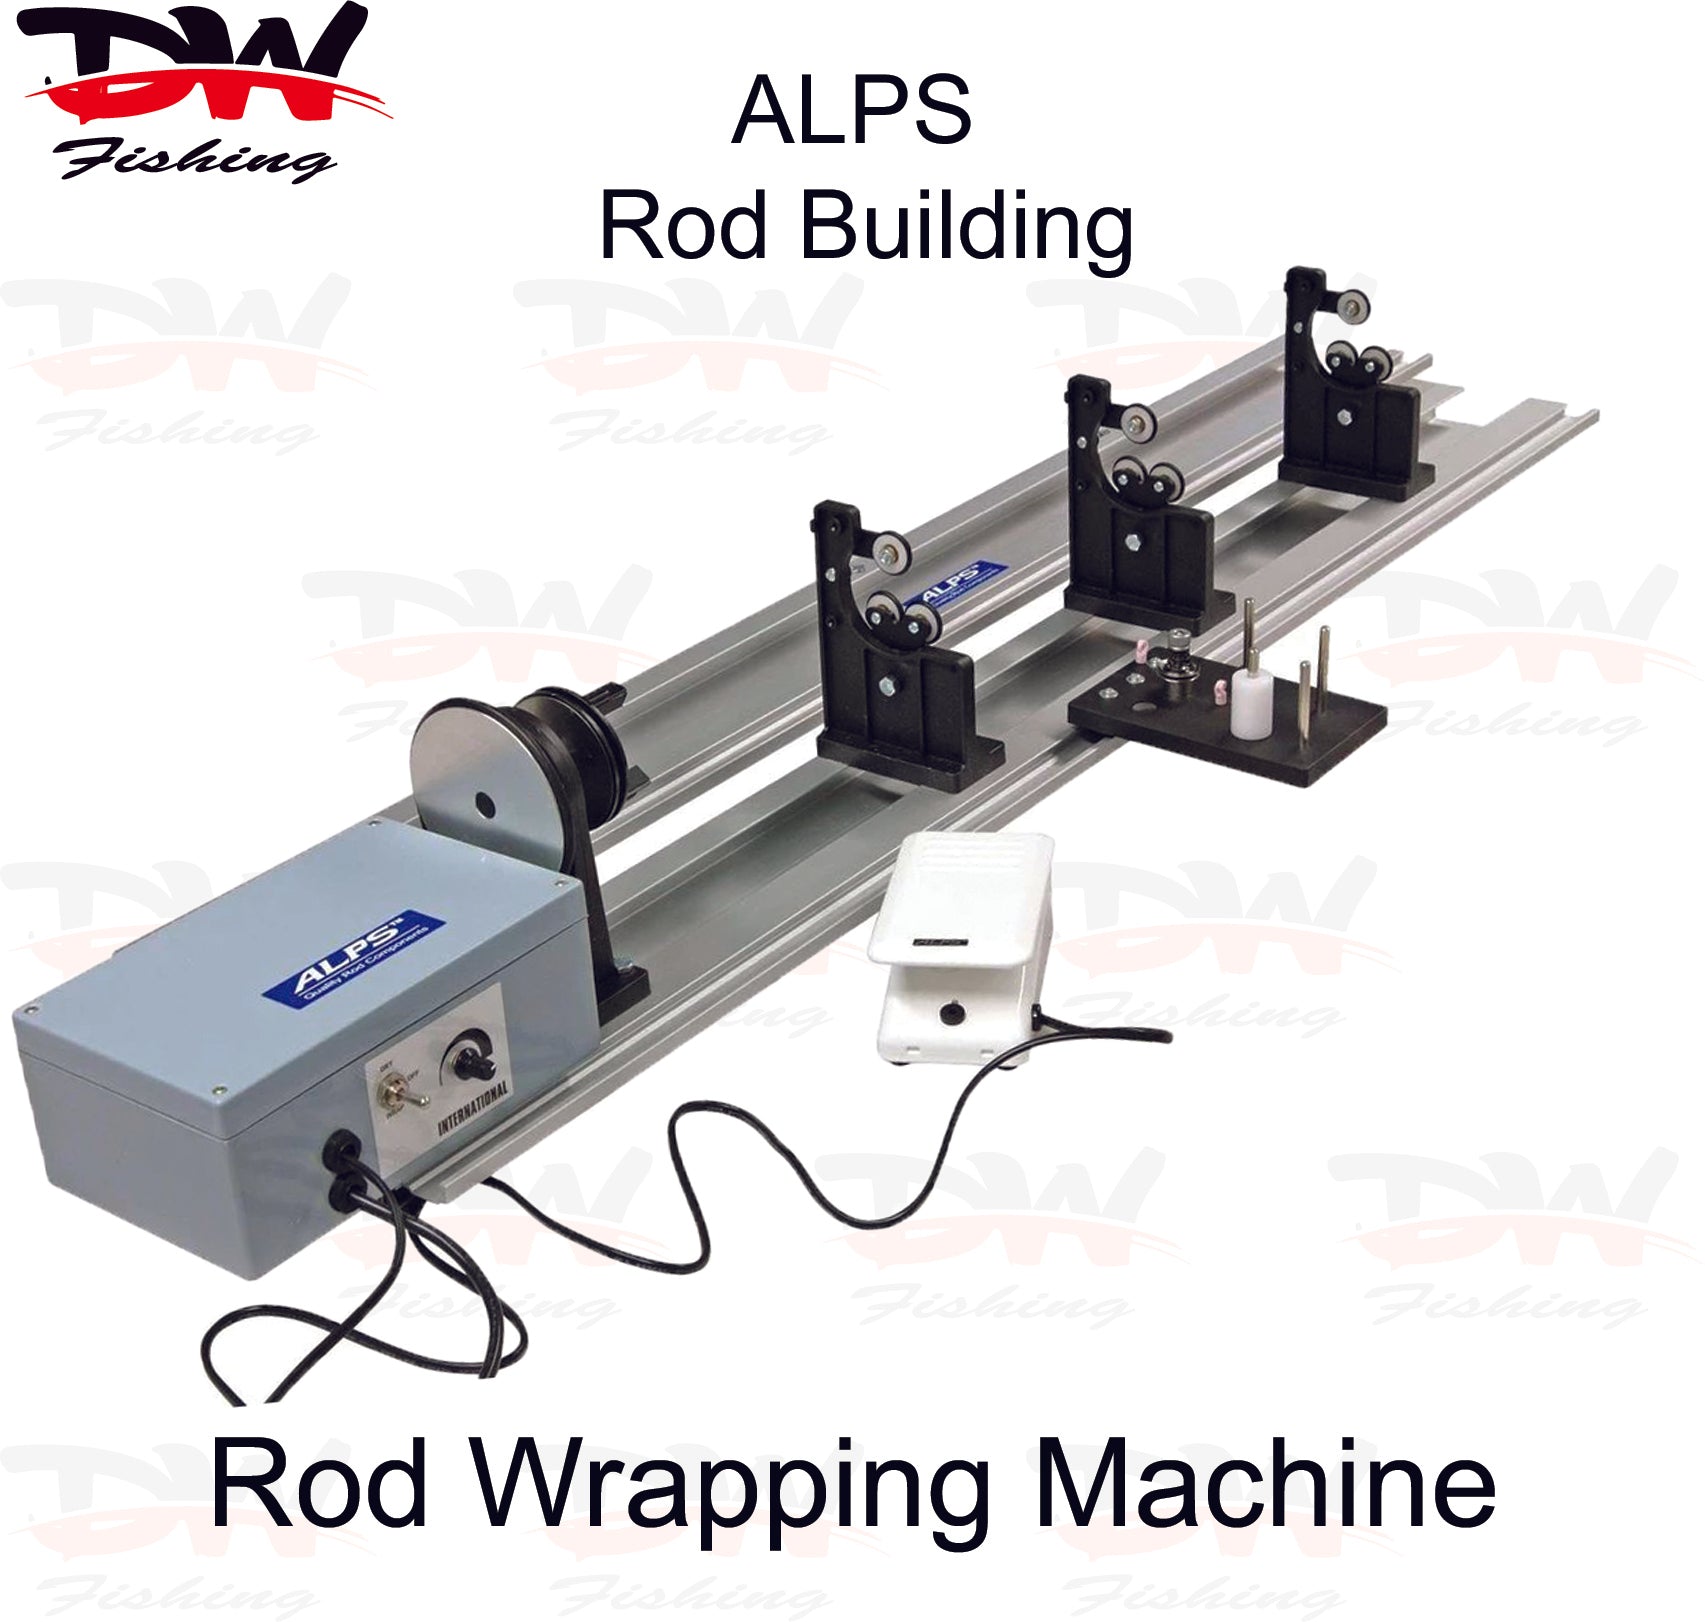 ALPS Rod Wrapping Machine, Rod Building